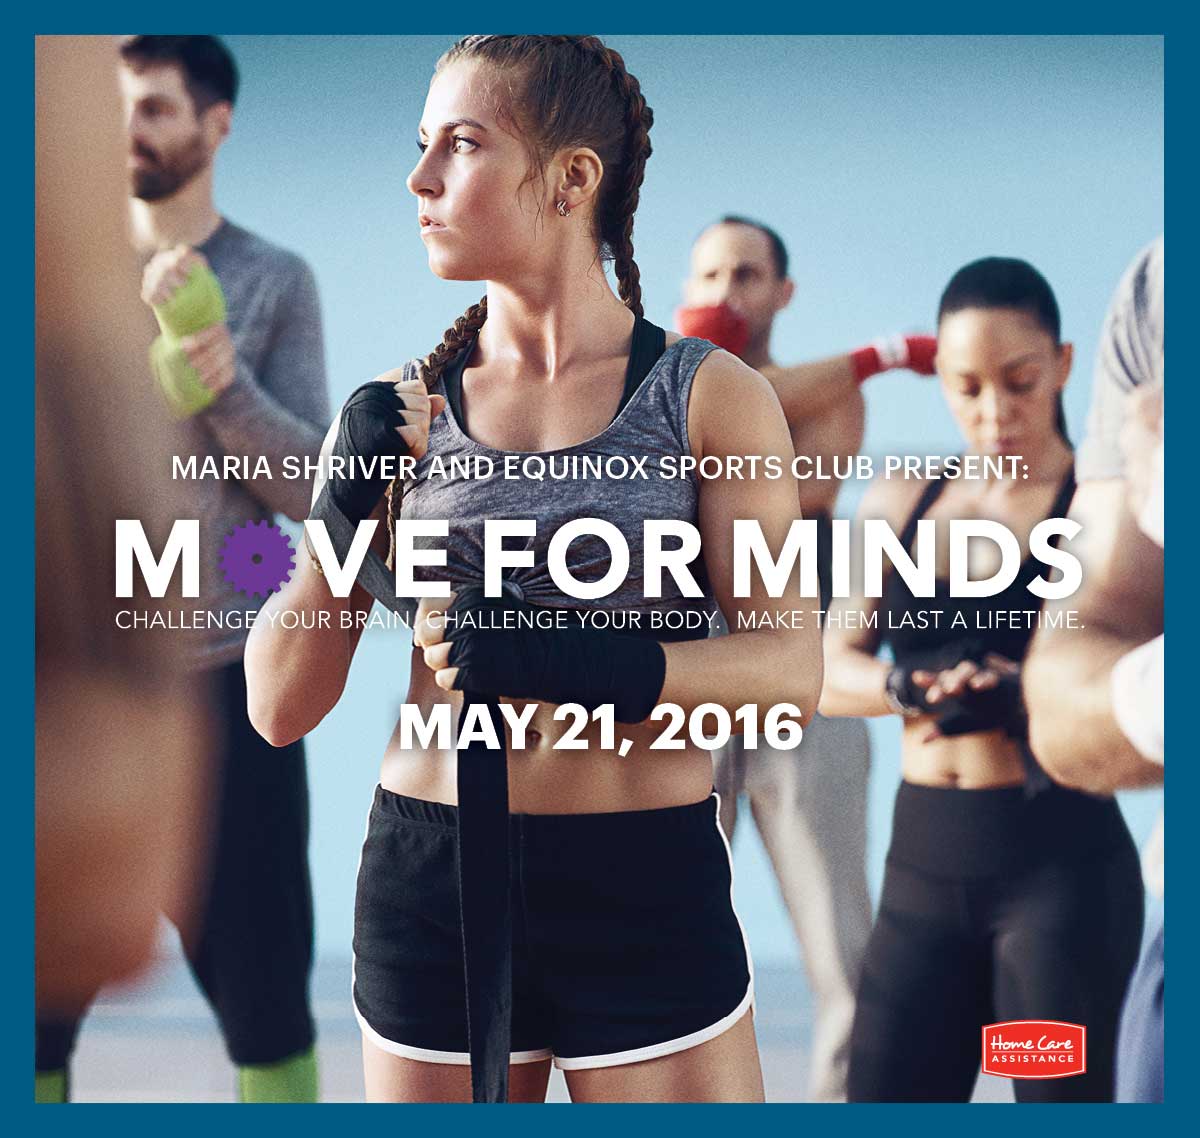 Maria Shriver's Move for Minds Event